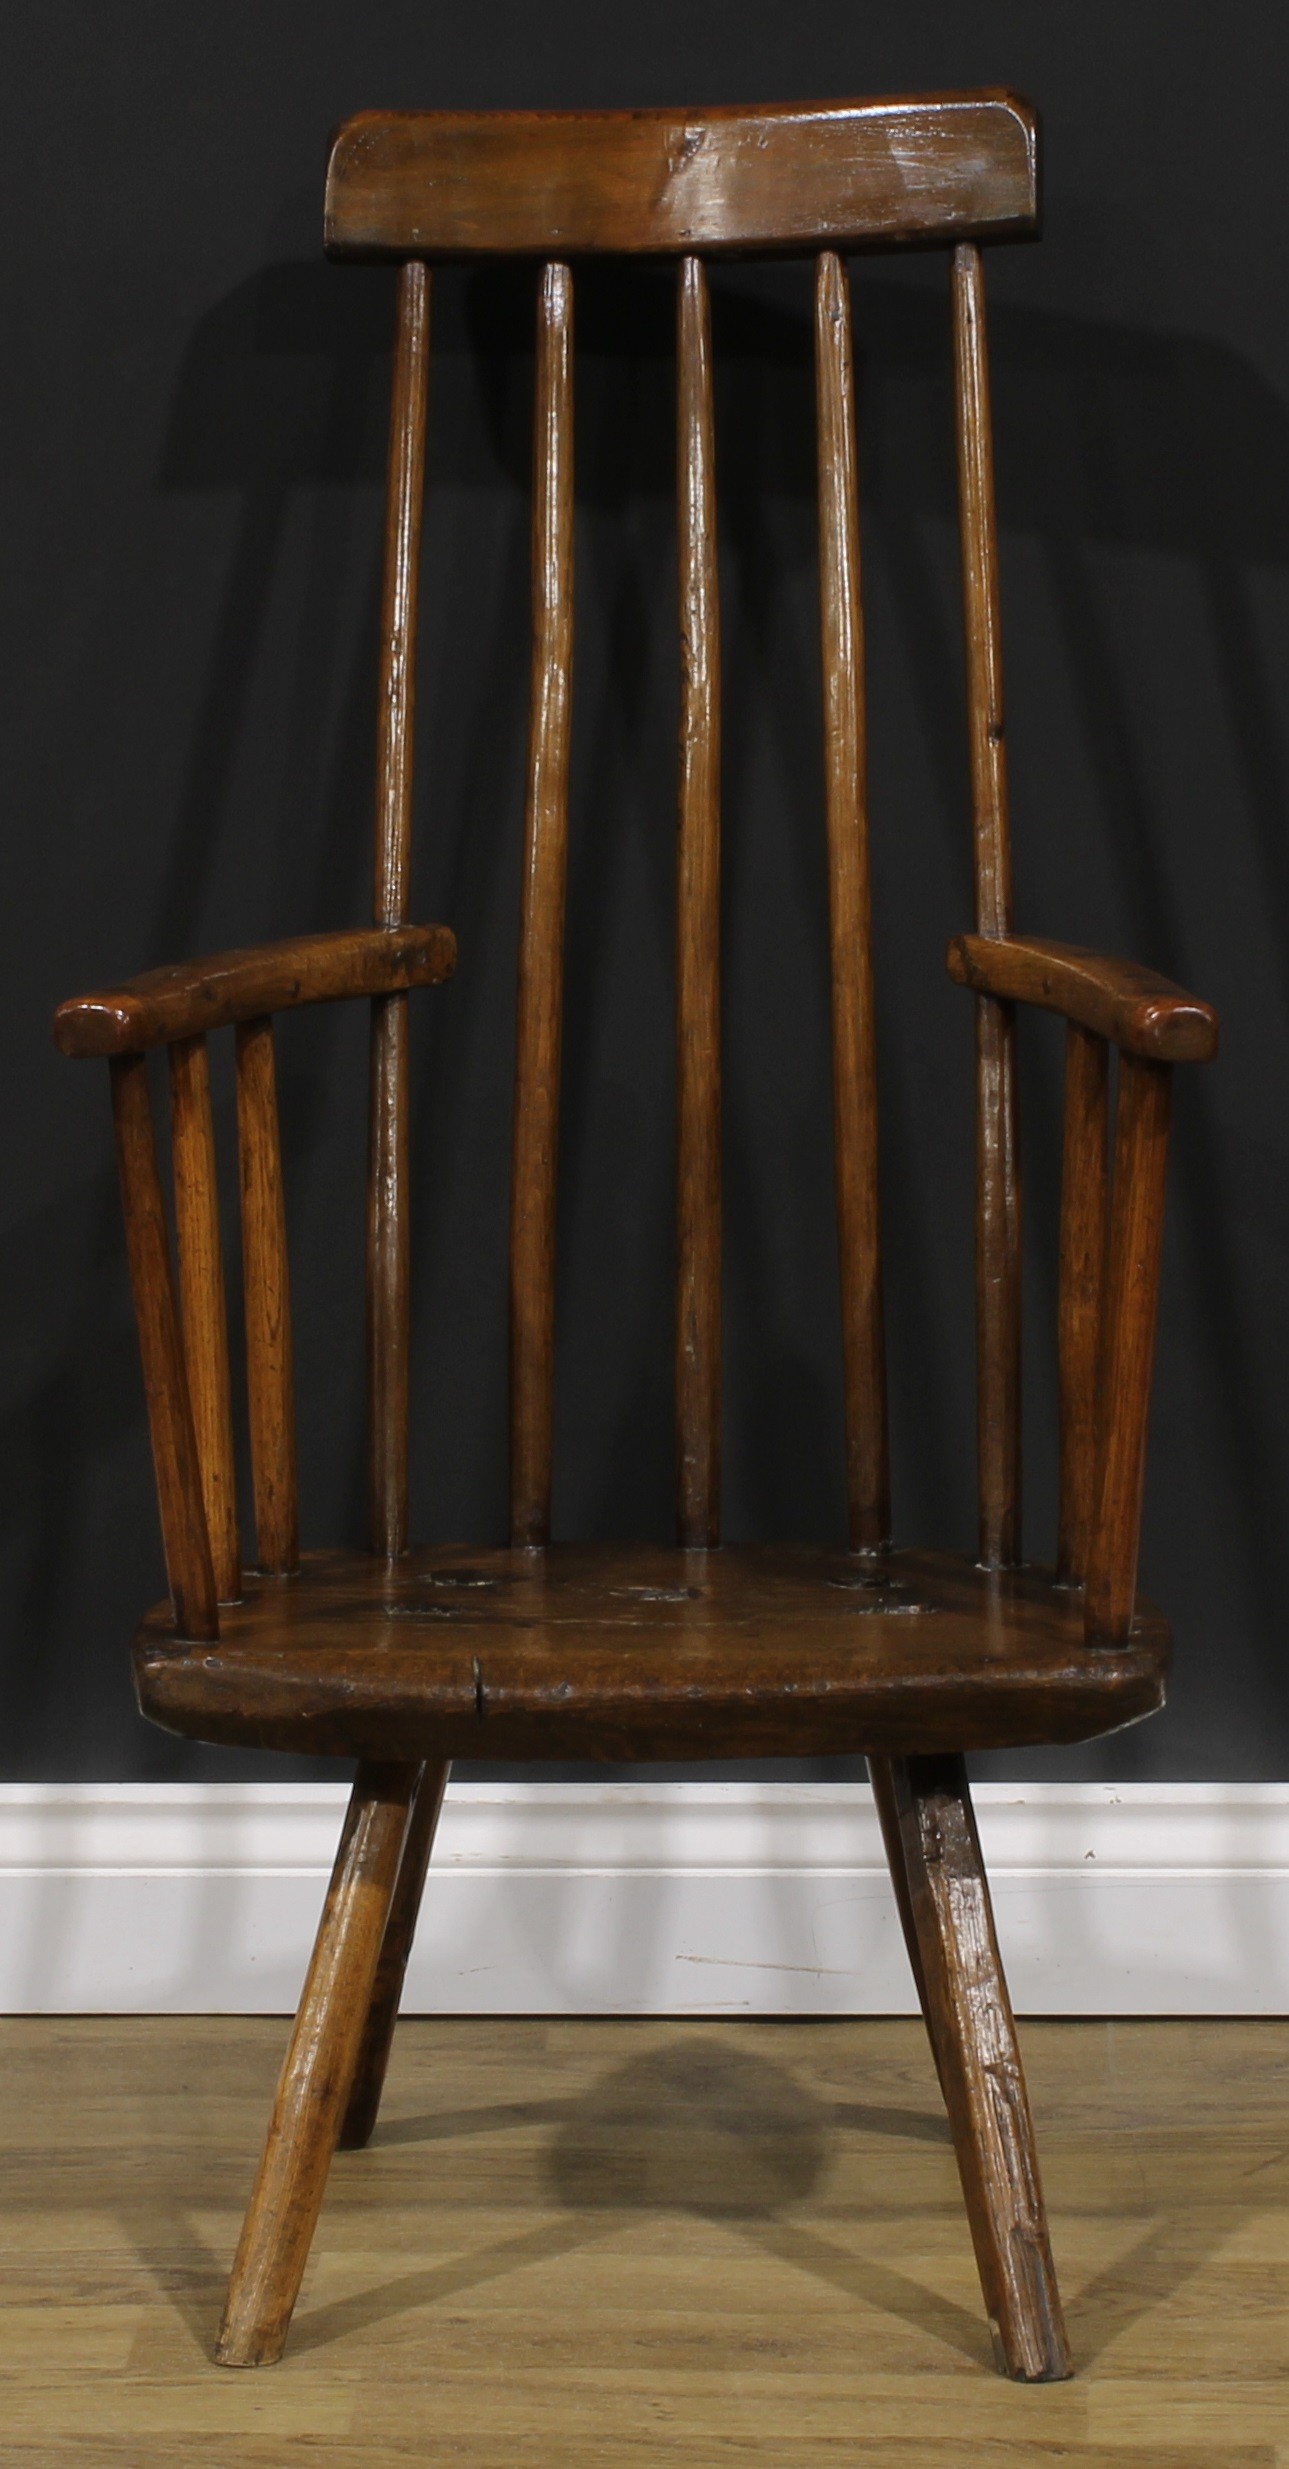 A 19th century Irish ash and elm primary hedge or famine chair, of traditional vernacular form, 99cm